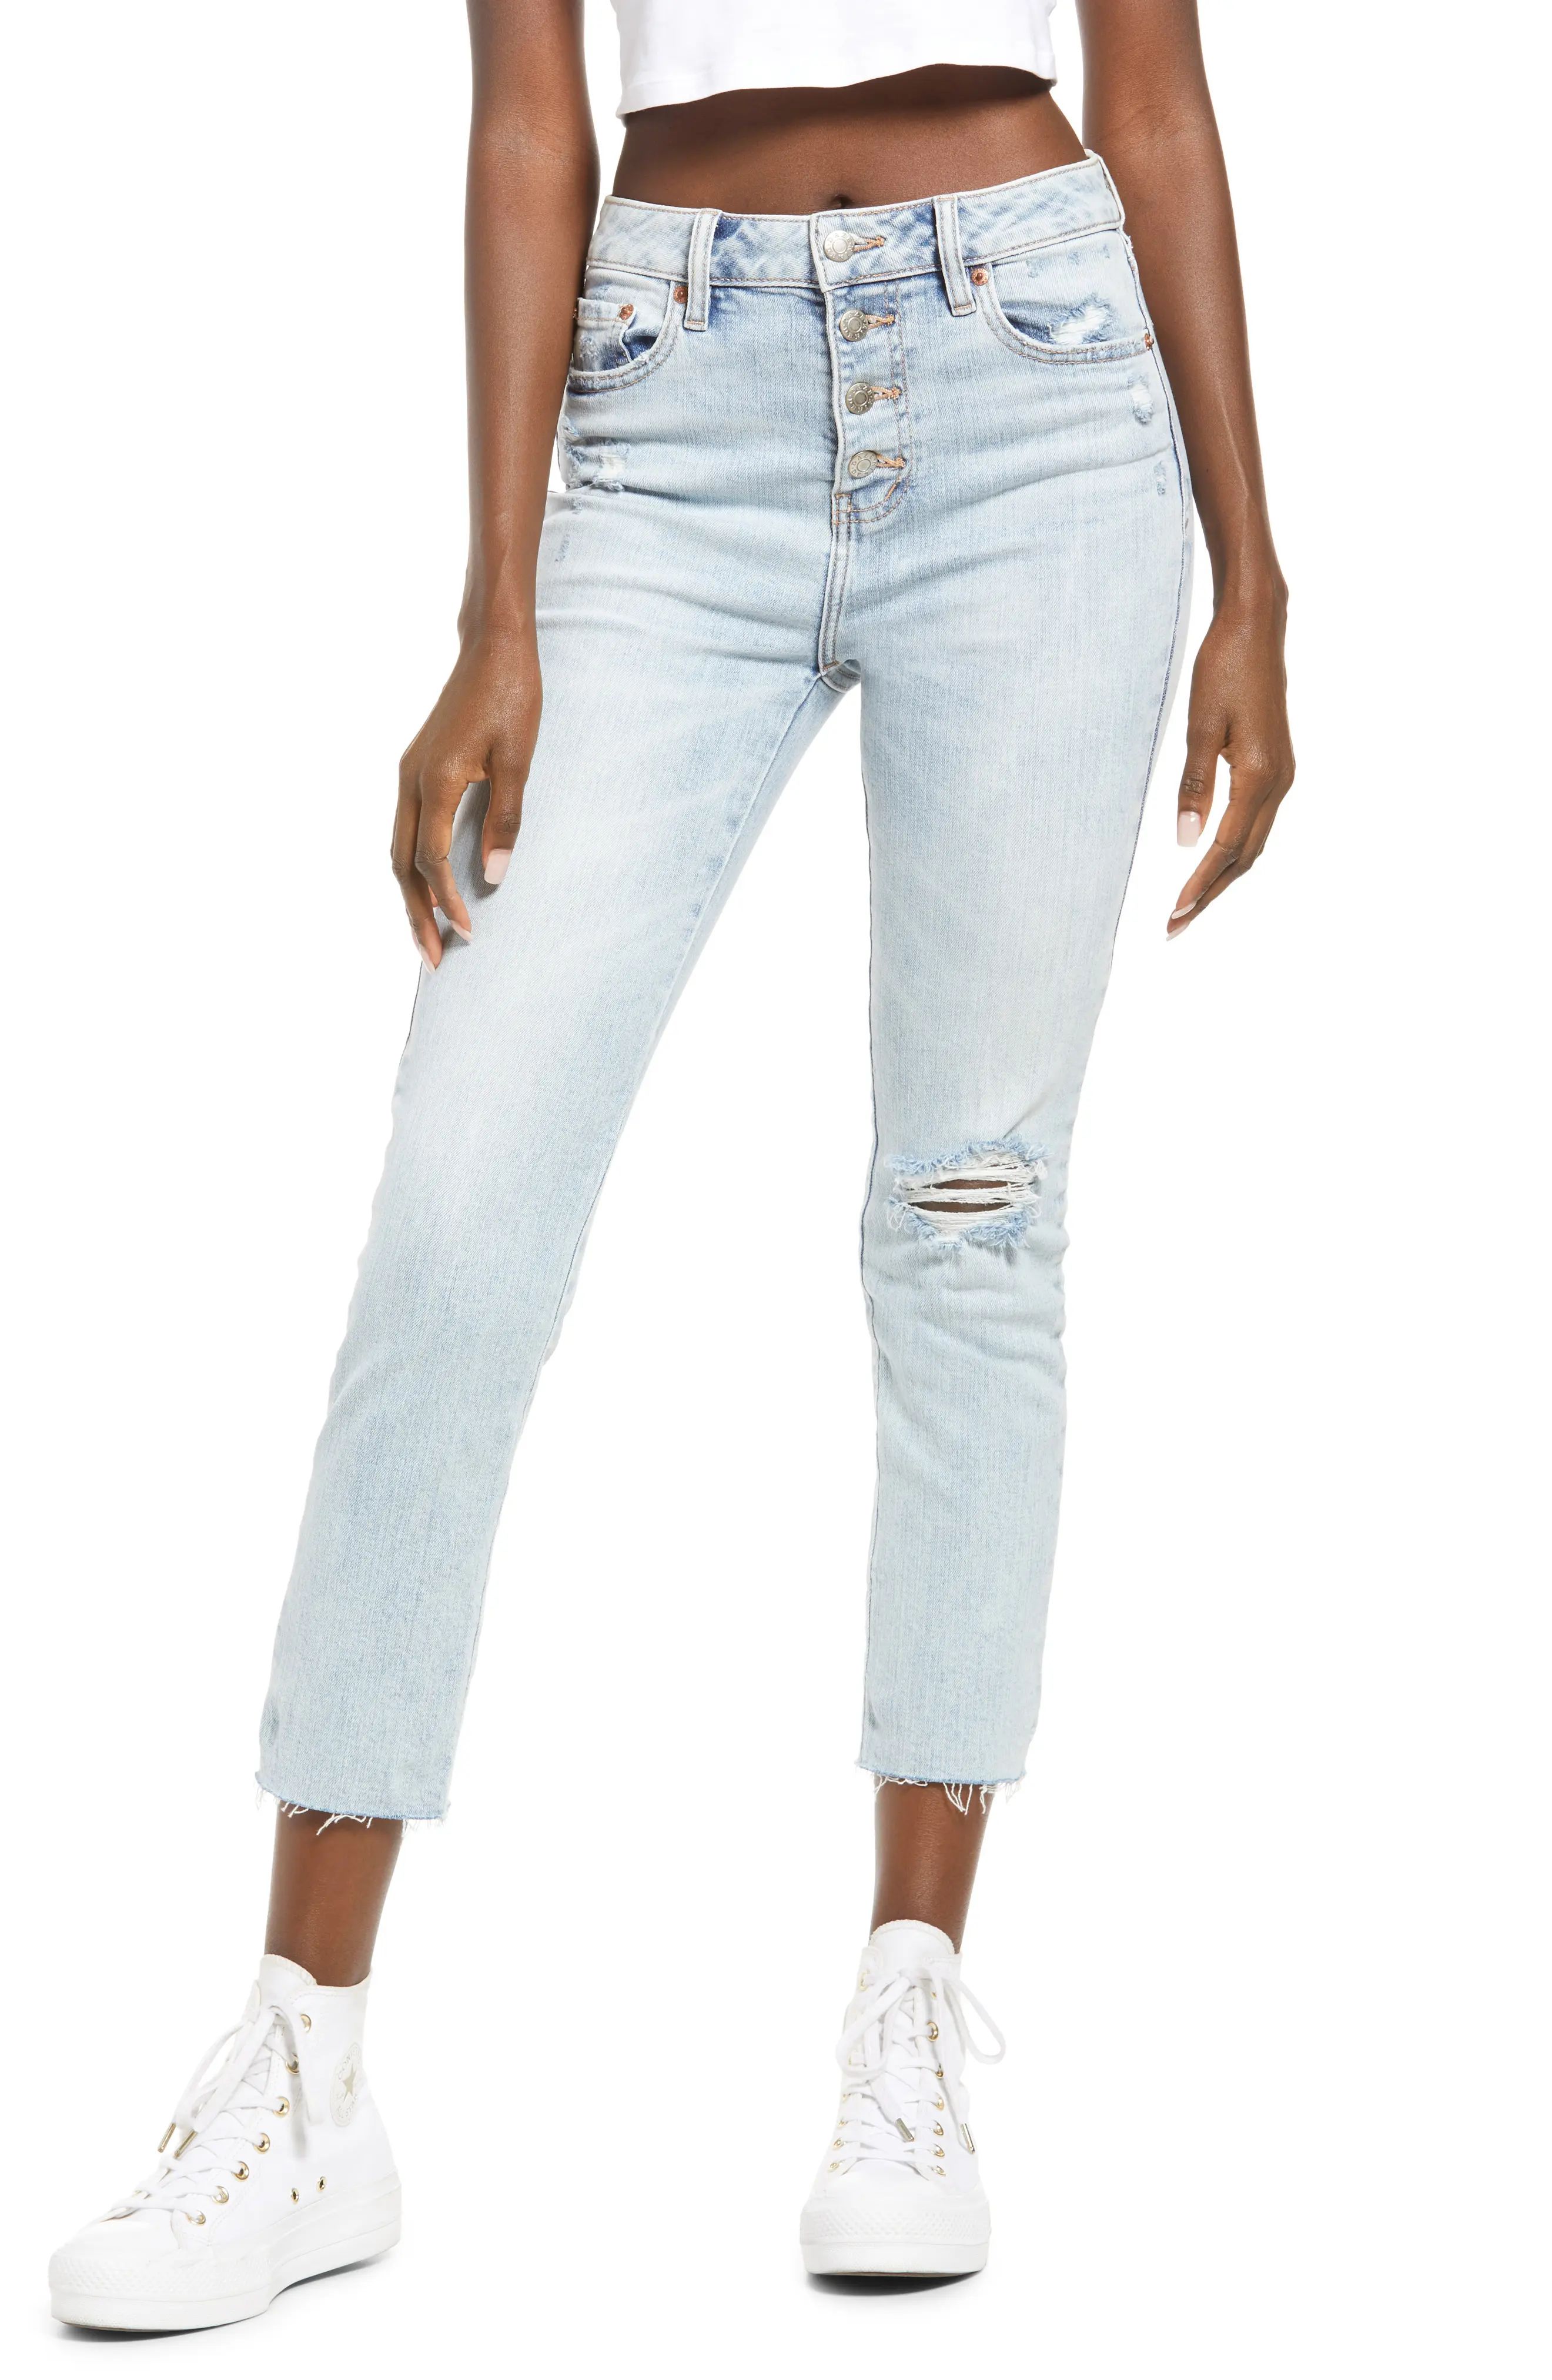 DAZE Daily Driver High Waist Button Fly Straight Leg Jeans in Winner at Nordstrom, Size 26 | Nordstrom